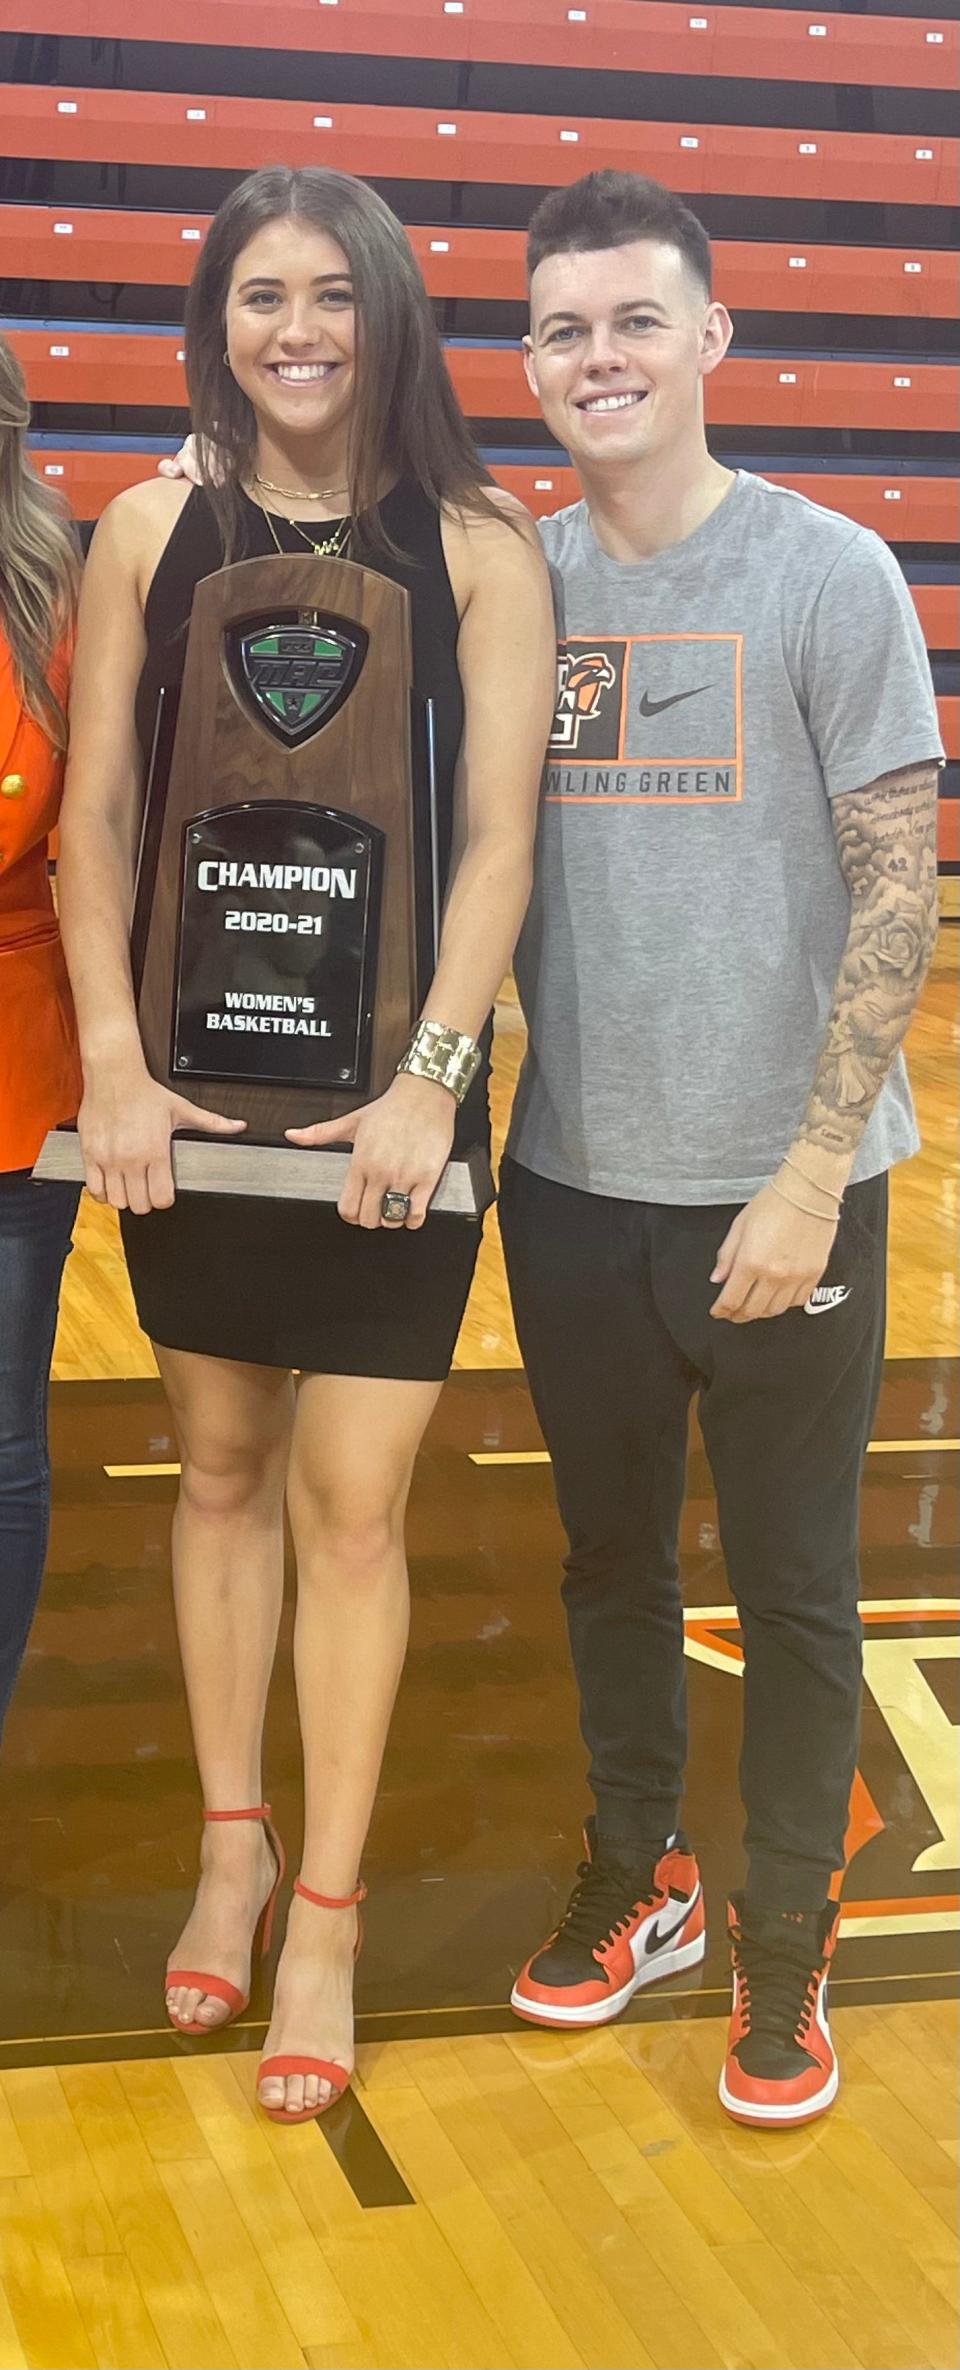 Kenzie Lewis, left, with her brother Riley, holding the 2020-21 MAC basketball championship trophy, which she won as a member of Bowling Green's team.